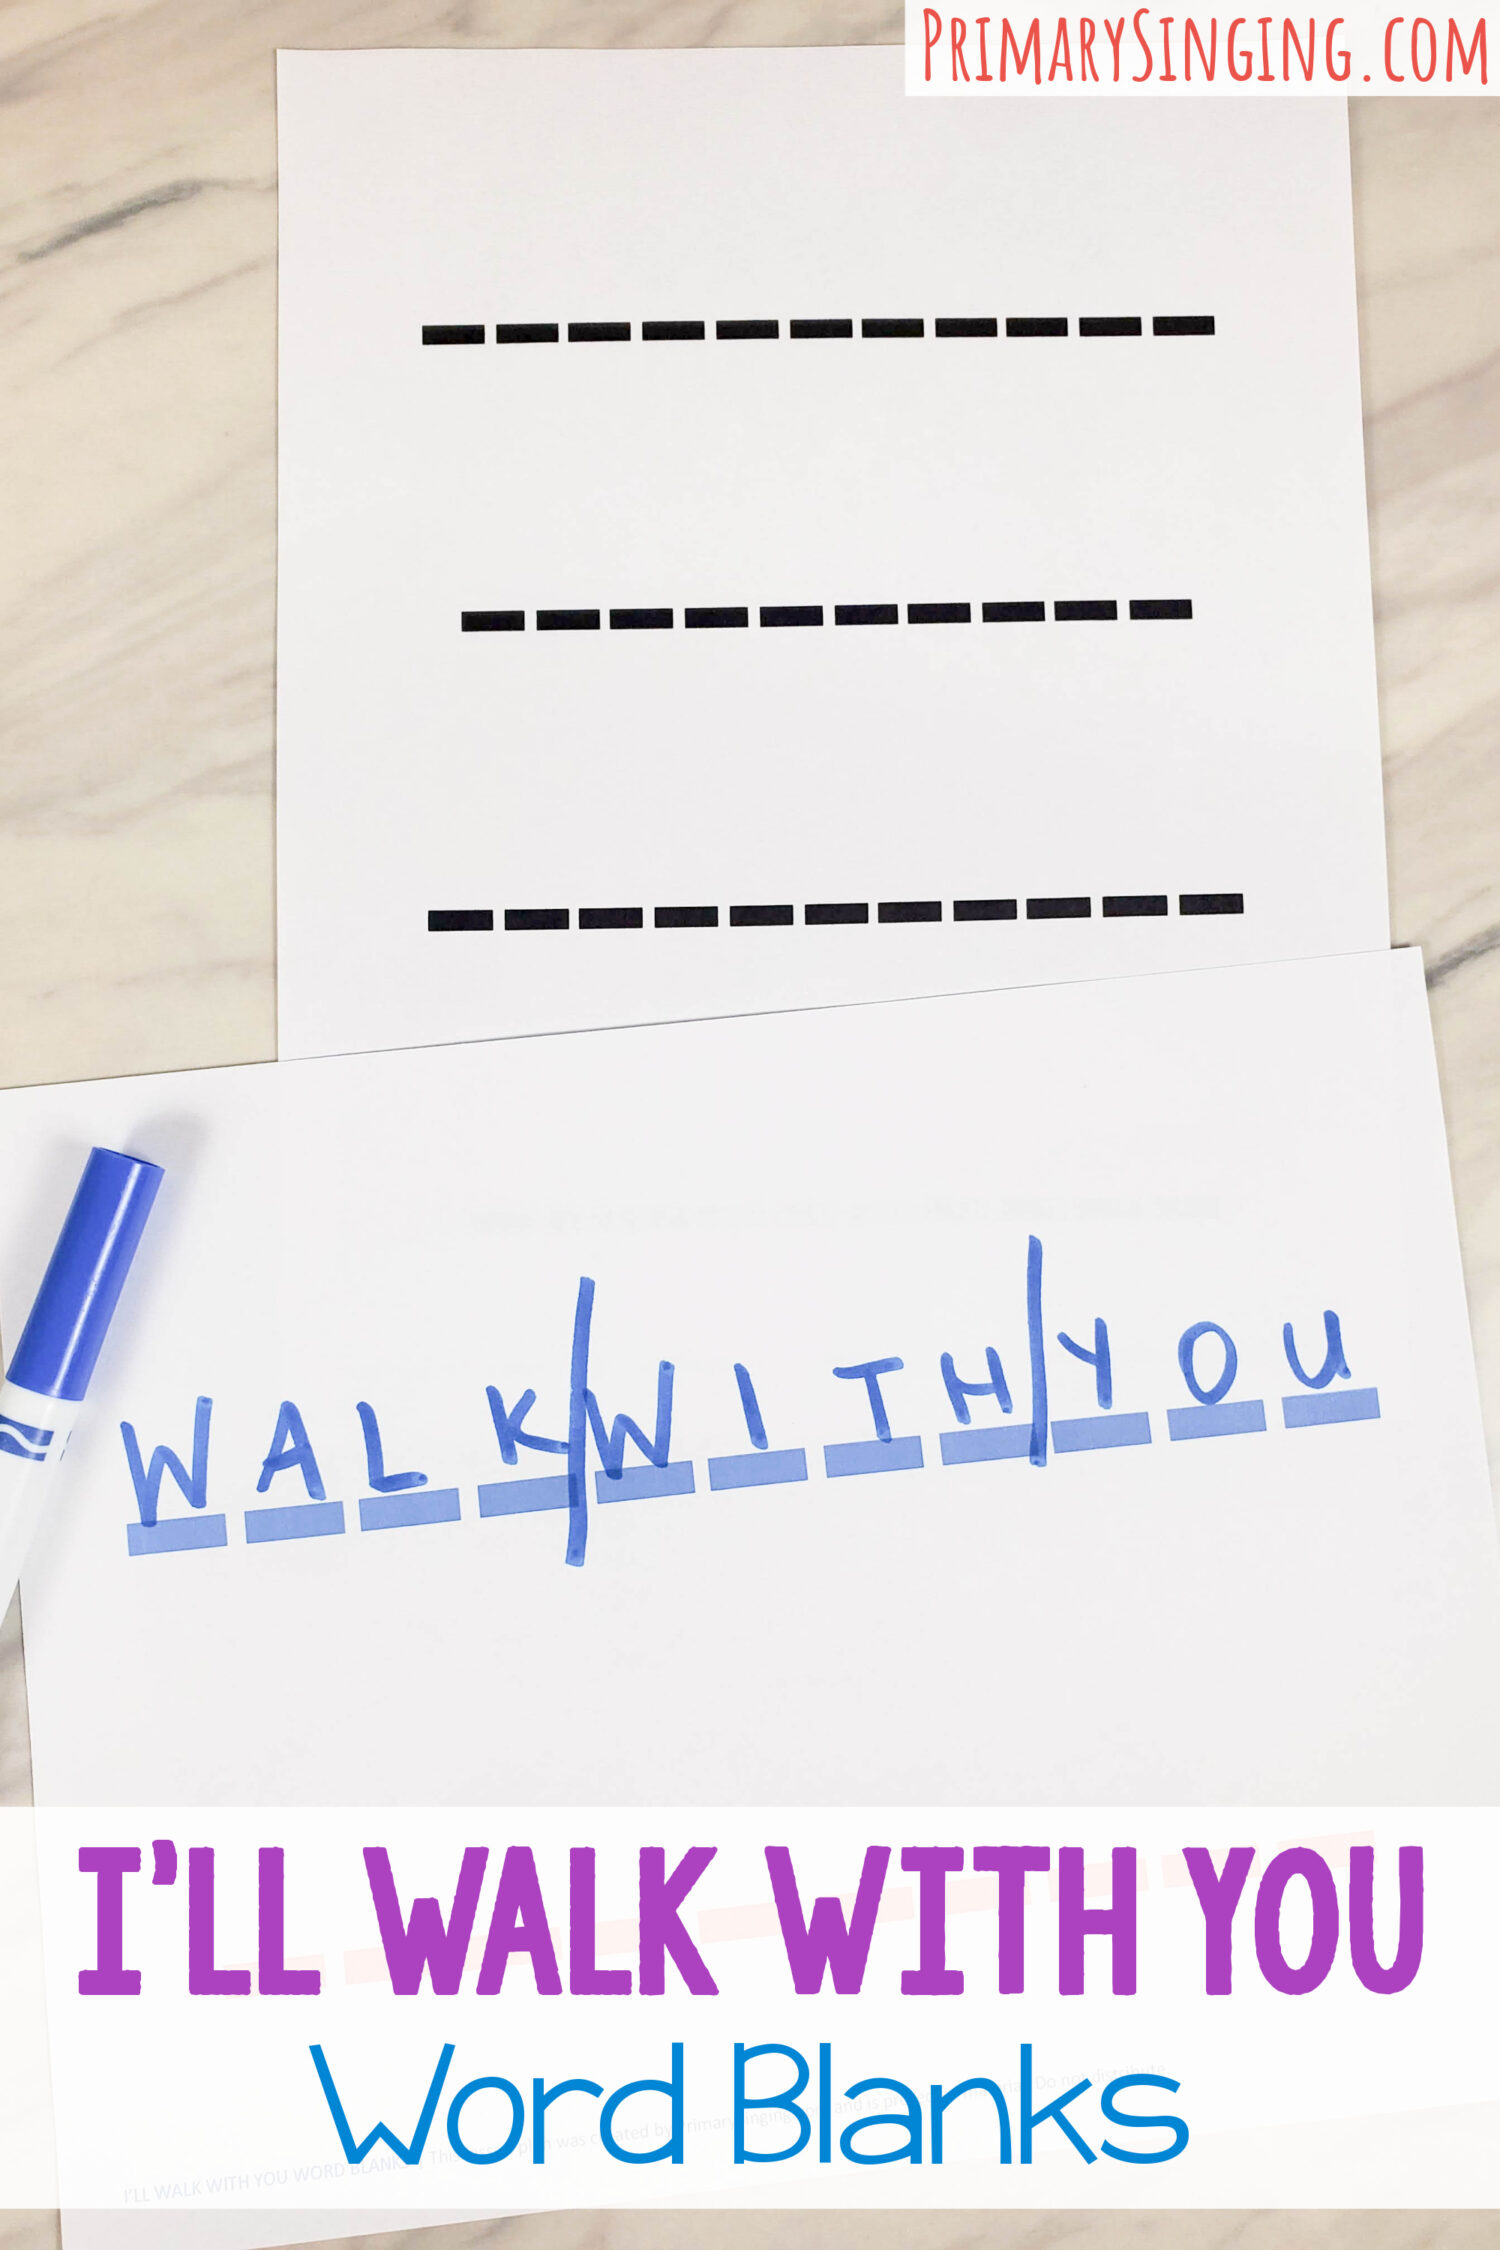 I'll Walk with You Word Blanks singing time ideas! Use these long blanks in a row and have the kids guess letters until they can figure out the phrase! It's a fun twist on hangman that will add in lots of song repetition and fun! See the lesson plan for LDS Primary music leaders and families.